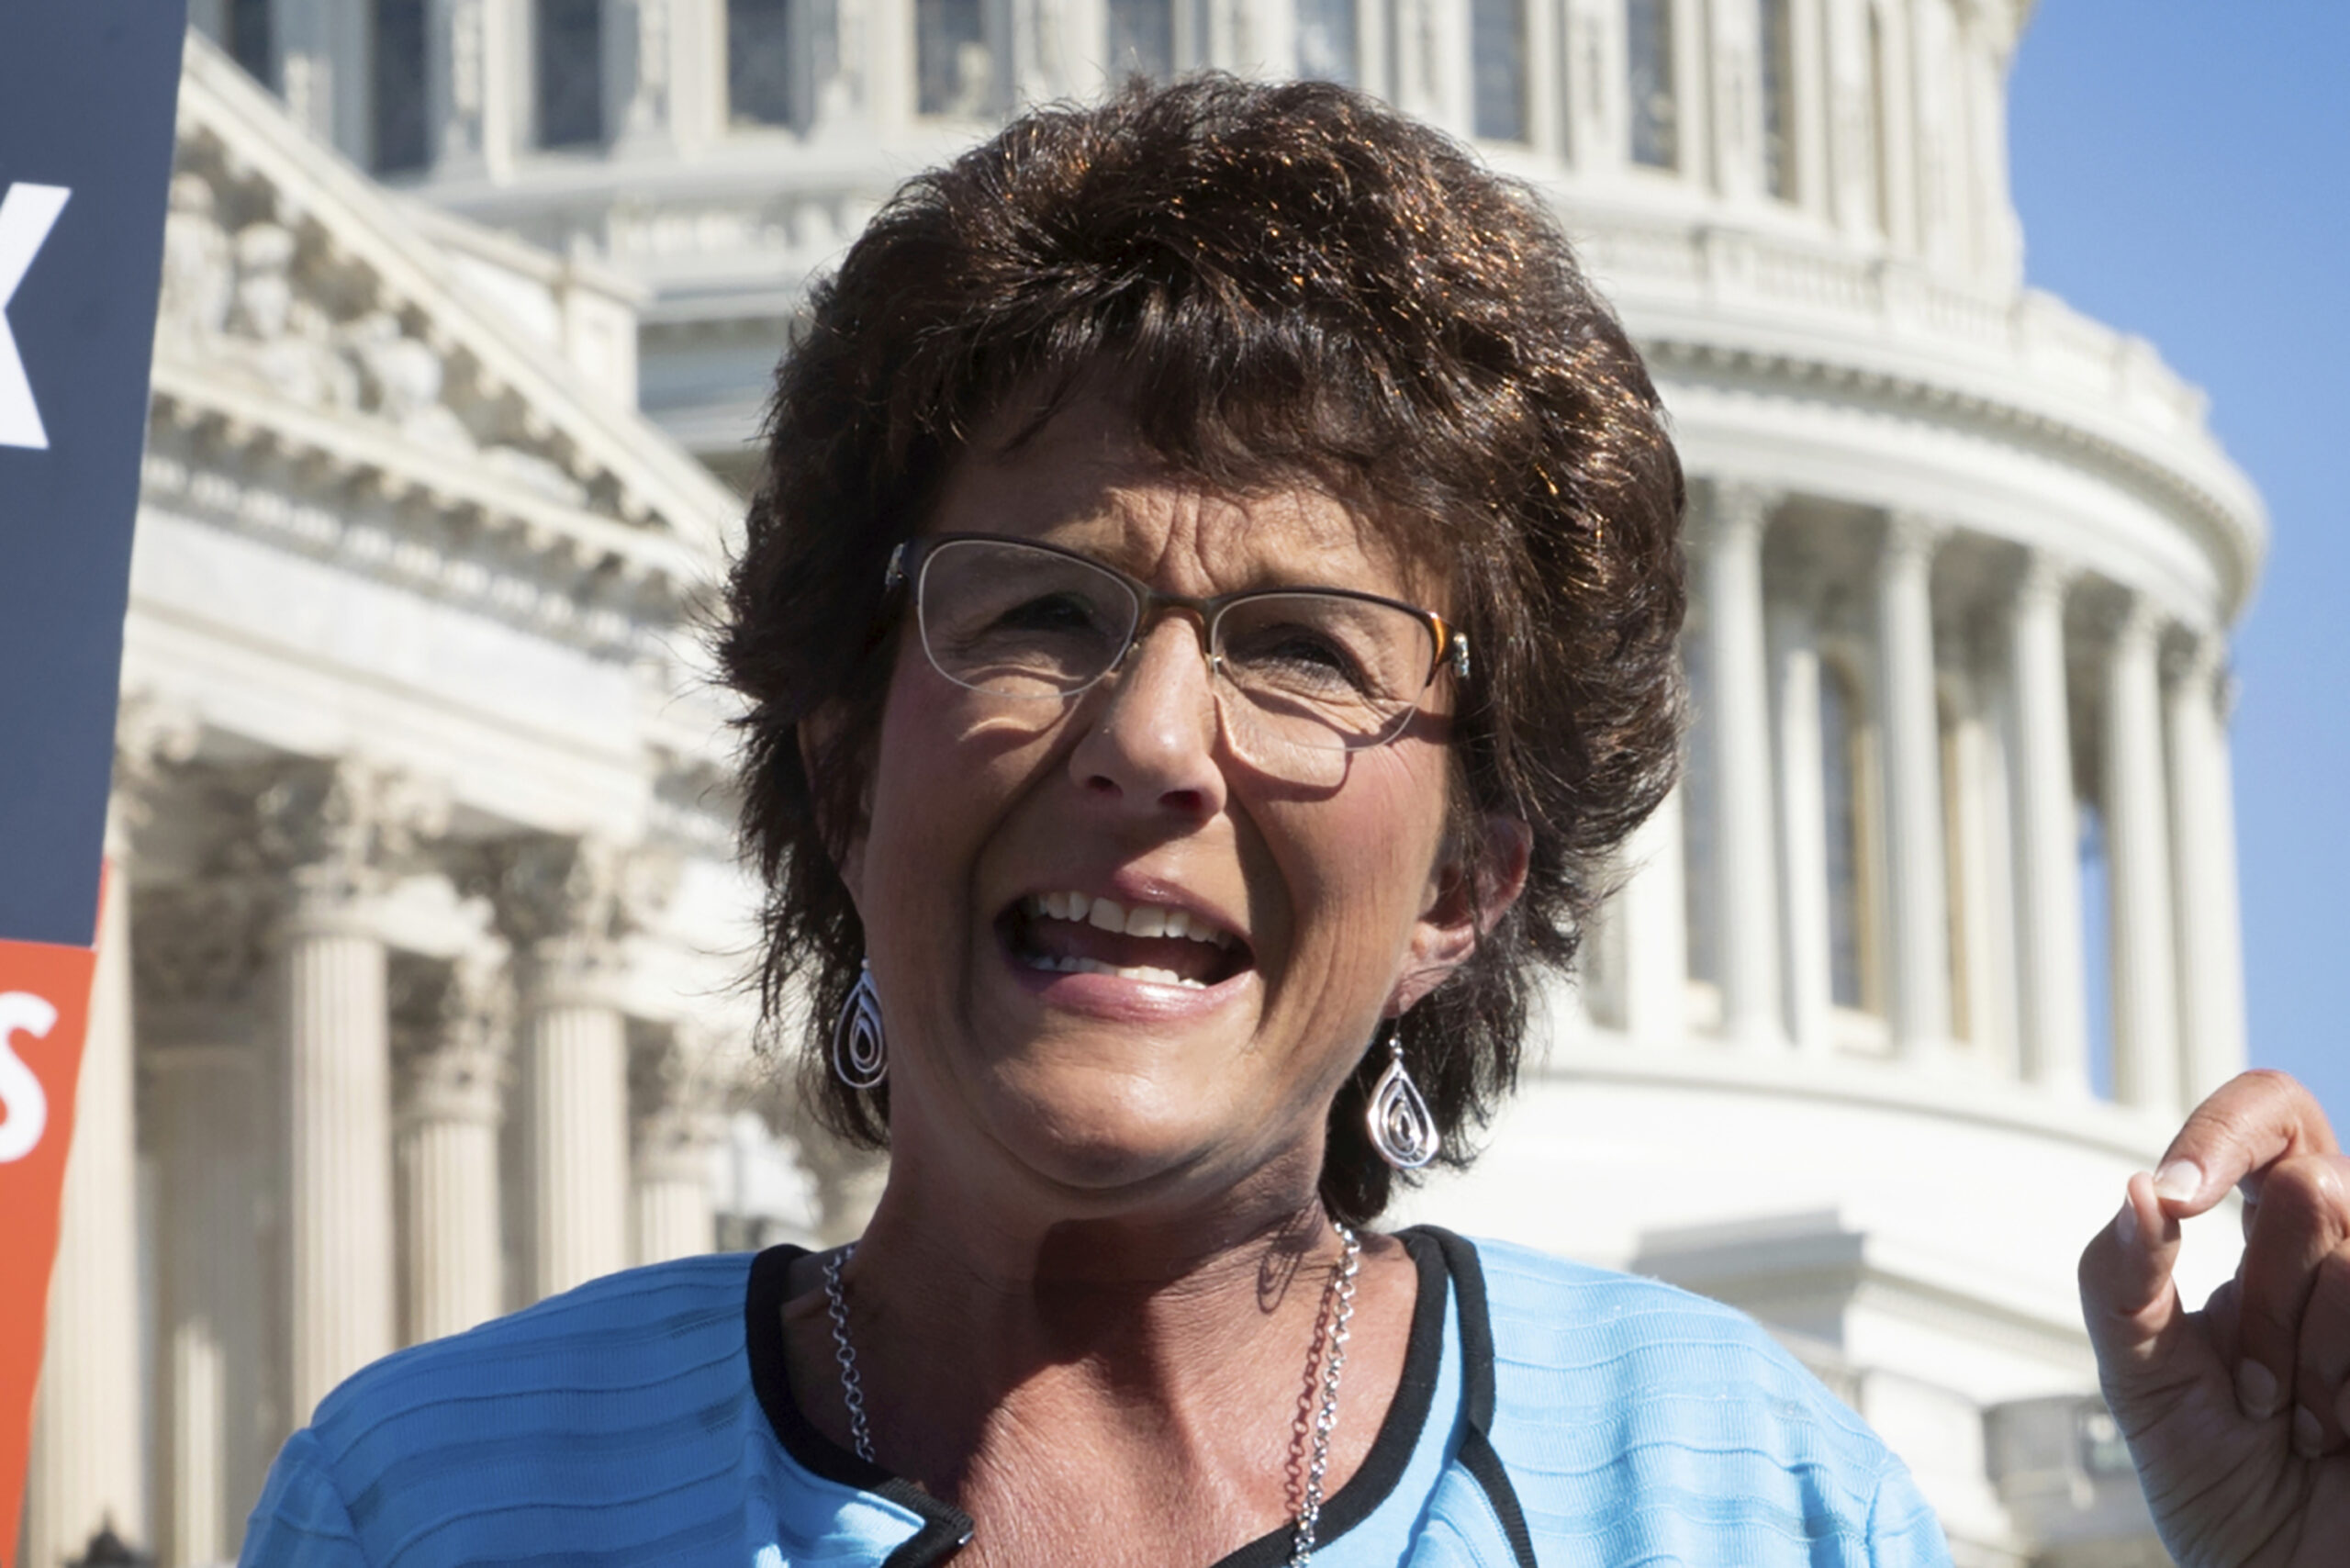 FILE - In this July 19, 2018, photo, Rep. Jackie Walorski, R-Ind., speaks on Capitol Hill in Washington. Walorski's office says that she was killed Wednesday, Aug. 3, 2022, in a car accident. (AP Photo/J. Scott Applewhite, File)